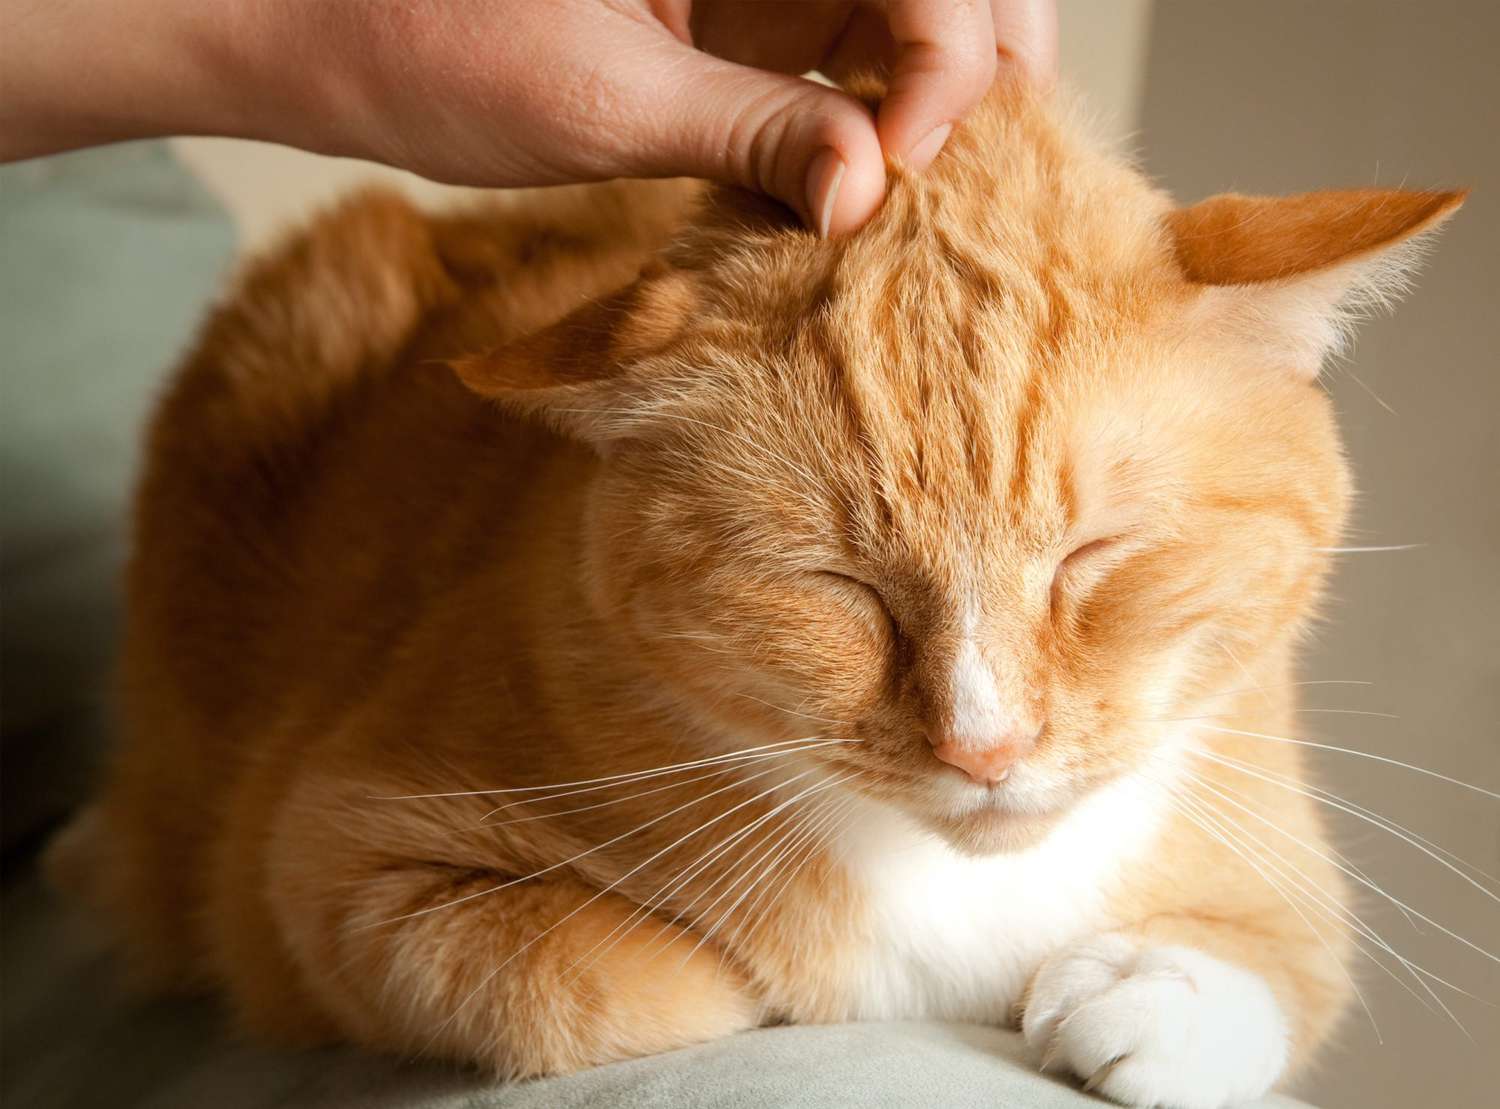 petting a ginger cat